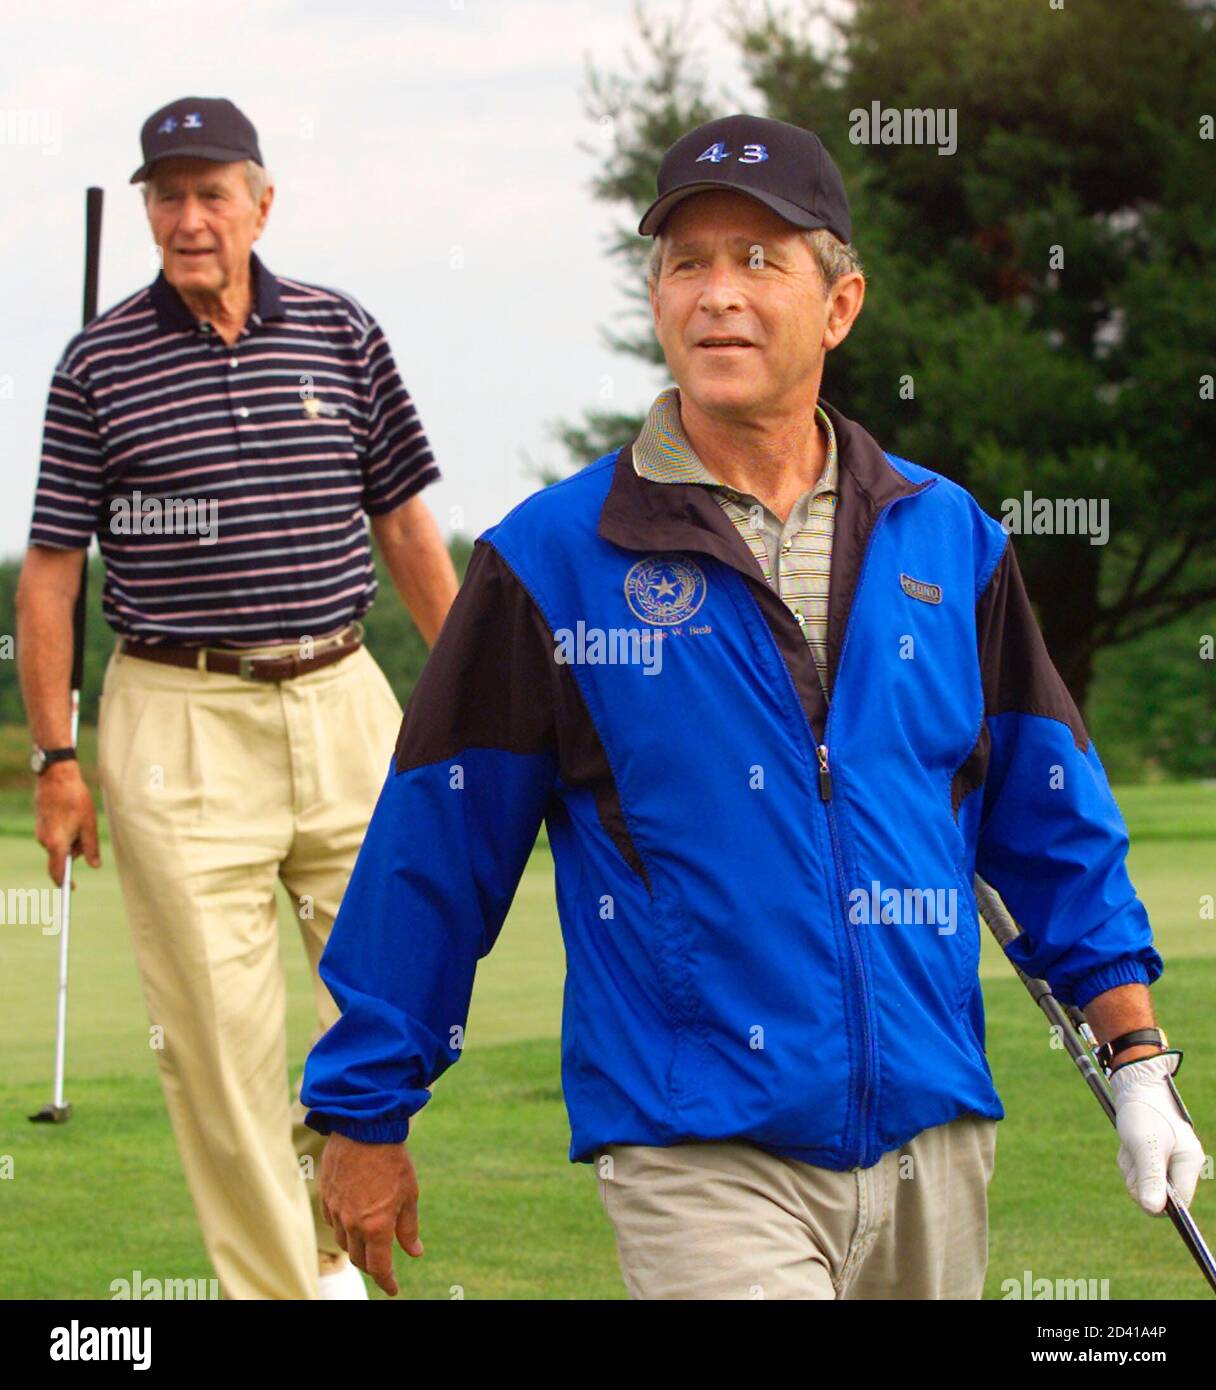 The 43rd U.S. President George W. Bush (R) and his father, the 41st President, George Bush walk from the 18th green after playing a round at the Cape Arundel Golf Club in Maine July 6, 2001. President George W. Bush is celebrating his 55th birthday today. The father-son golf tandem are sporting hats bearing the numbers 41 and 43 reflecting their presidencies. Stock Photo